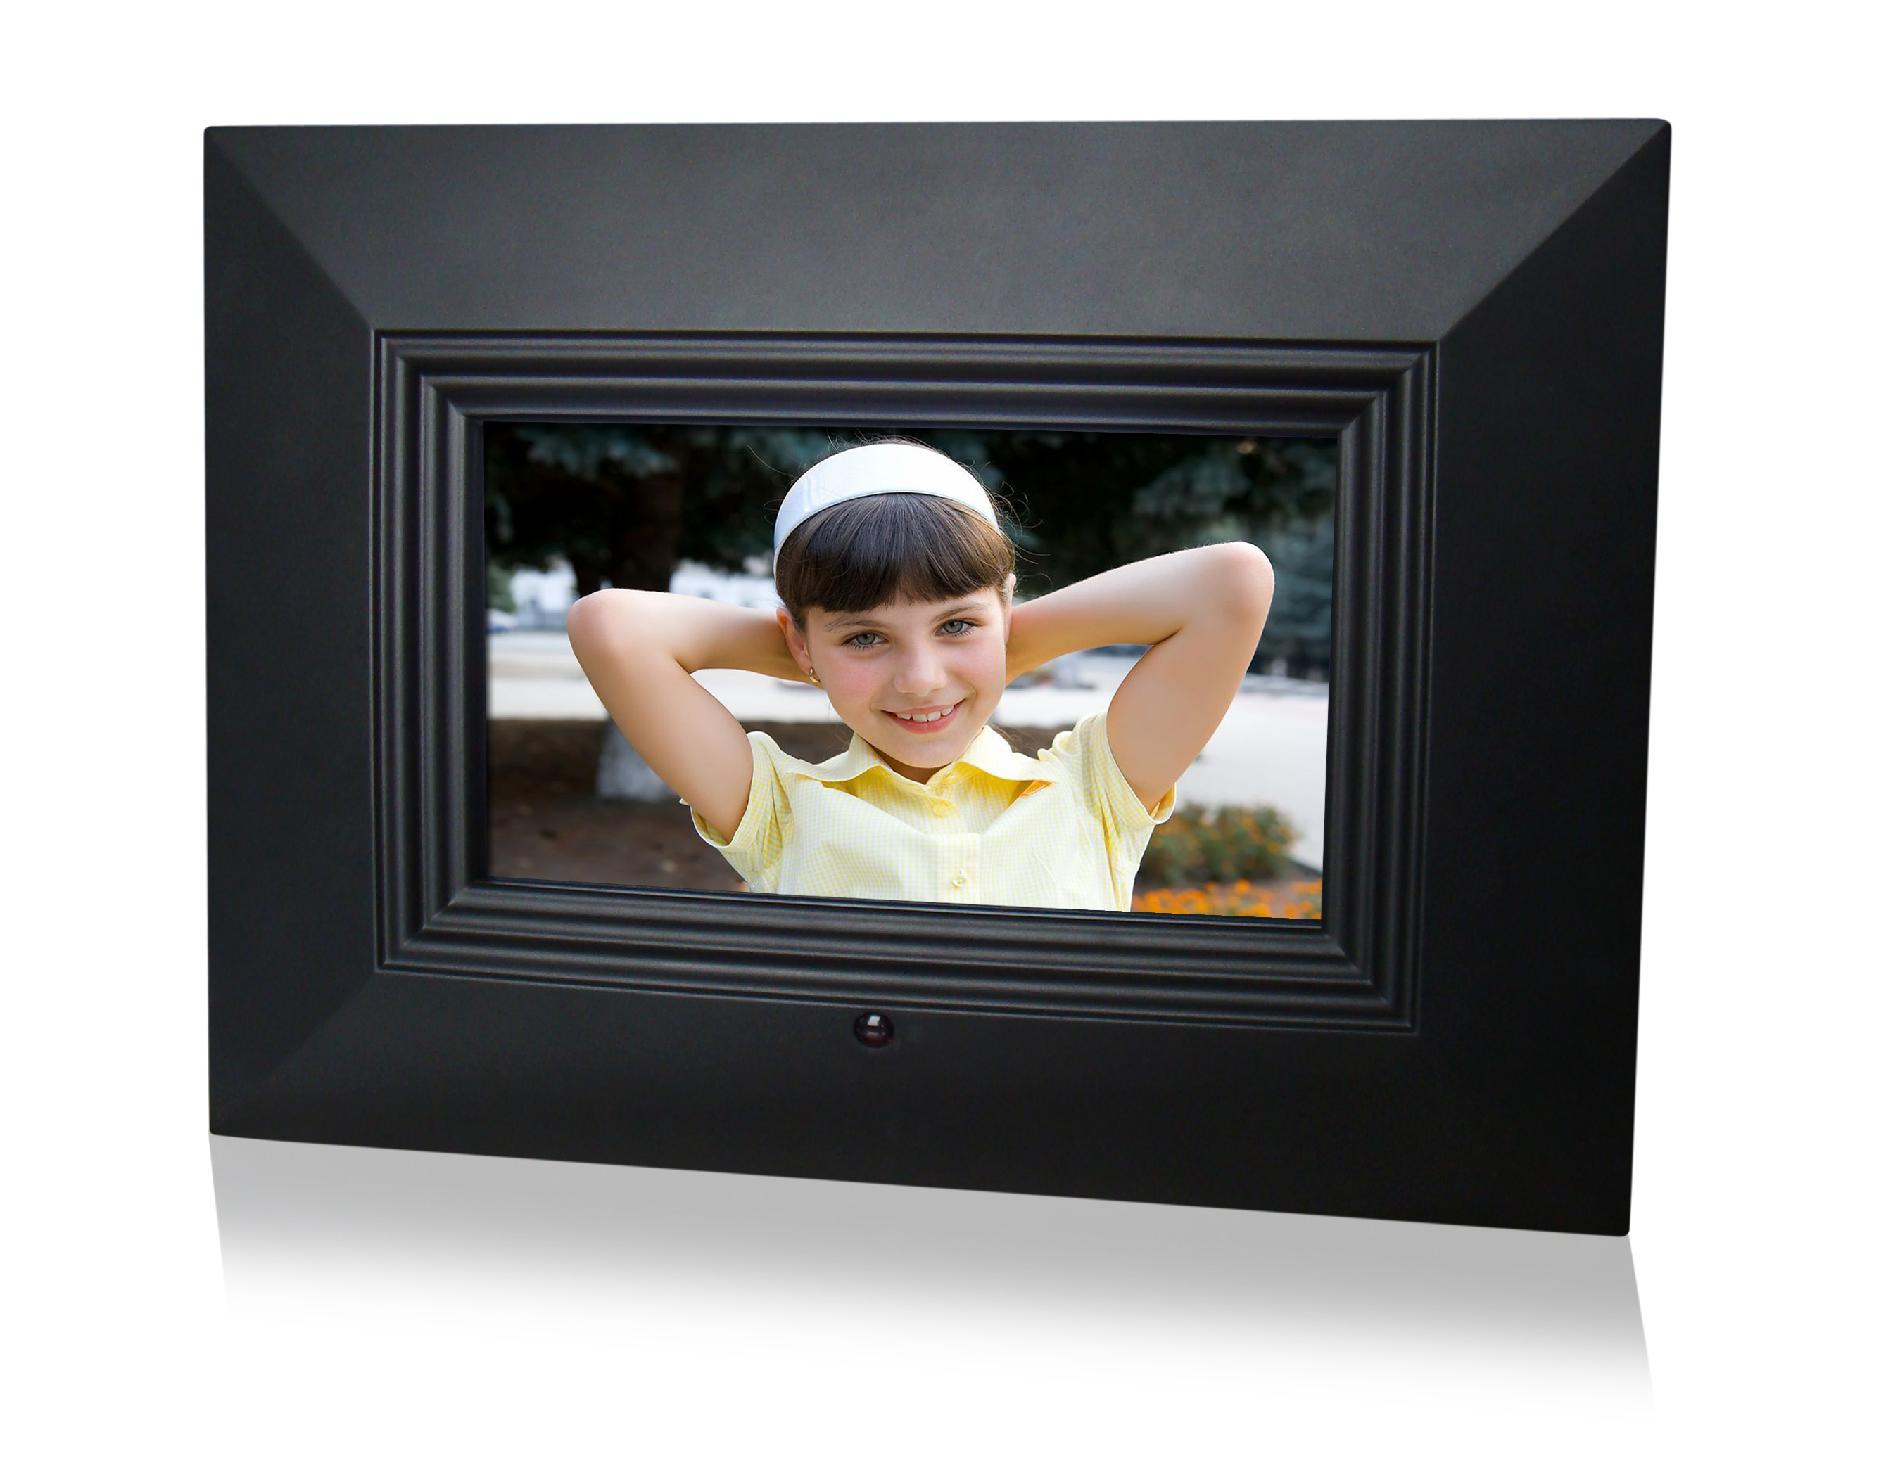 Digital Picture Frames as Low as $29.99!